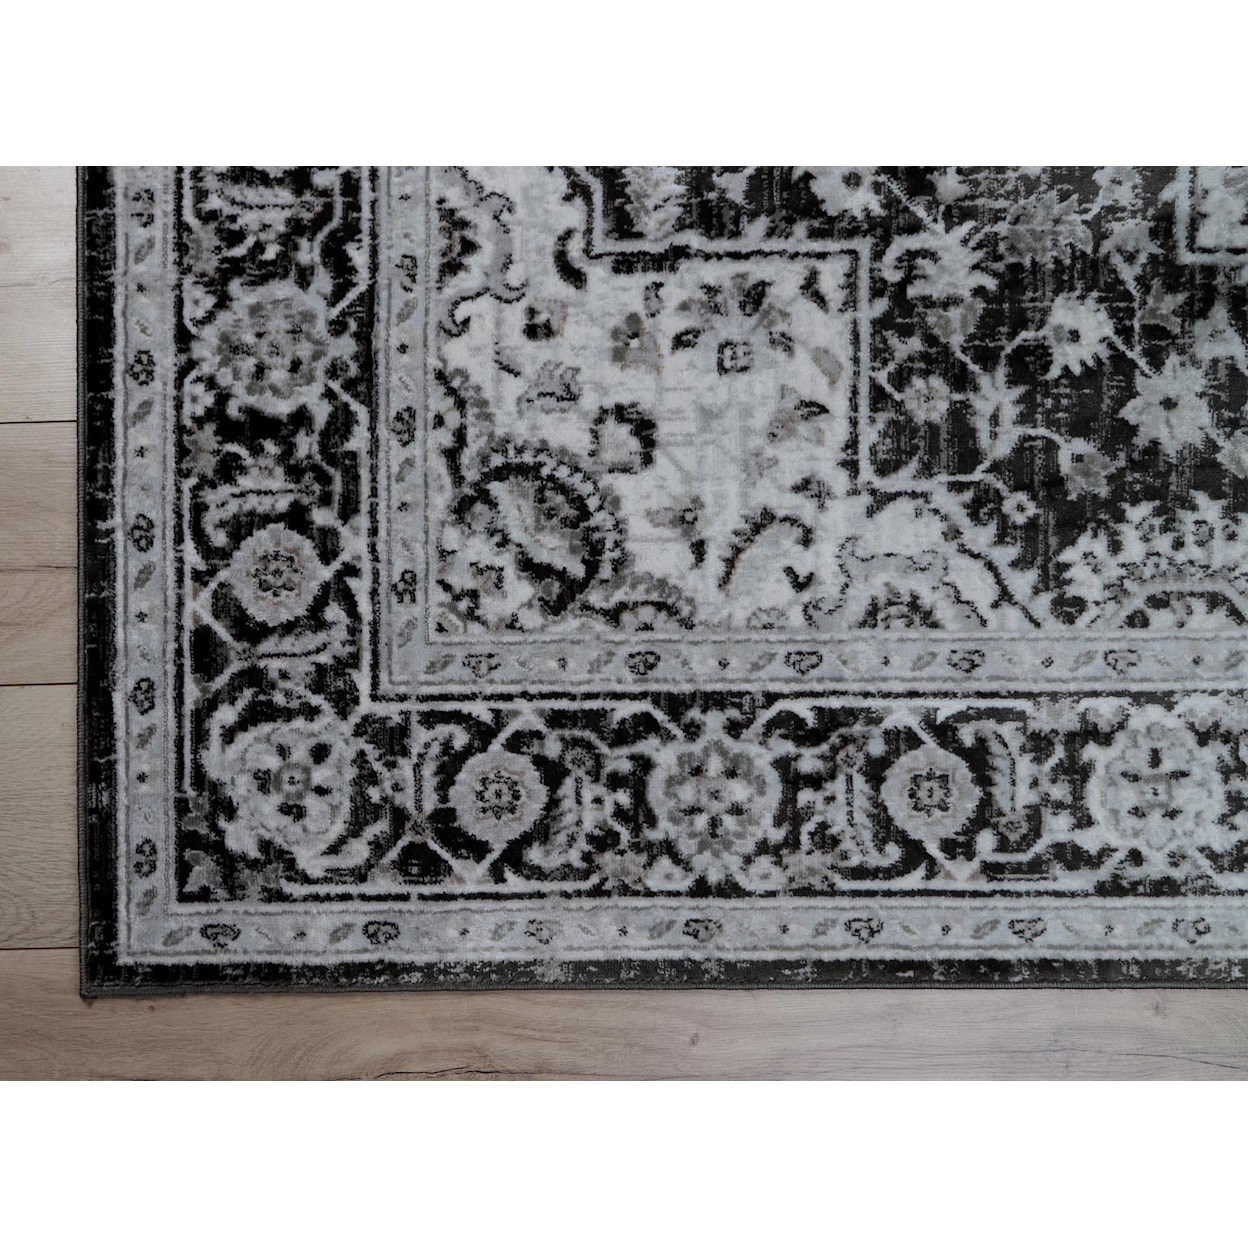 MDA Rugs Trendy Collection TRENDY 5X8 BLACK/WHITE AREA RUG |